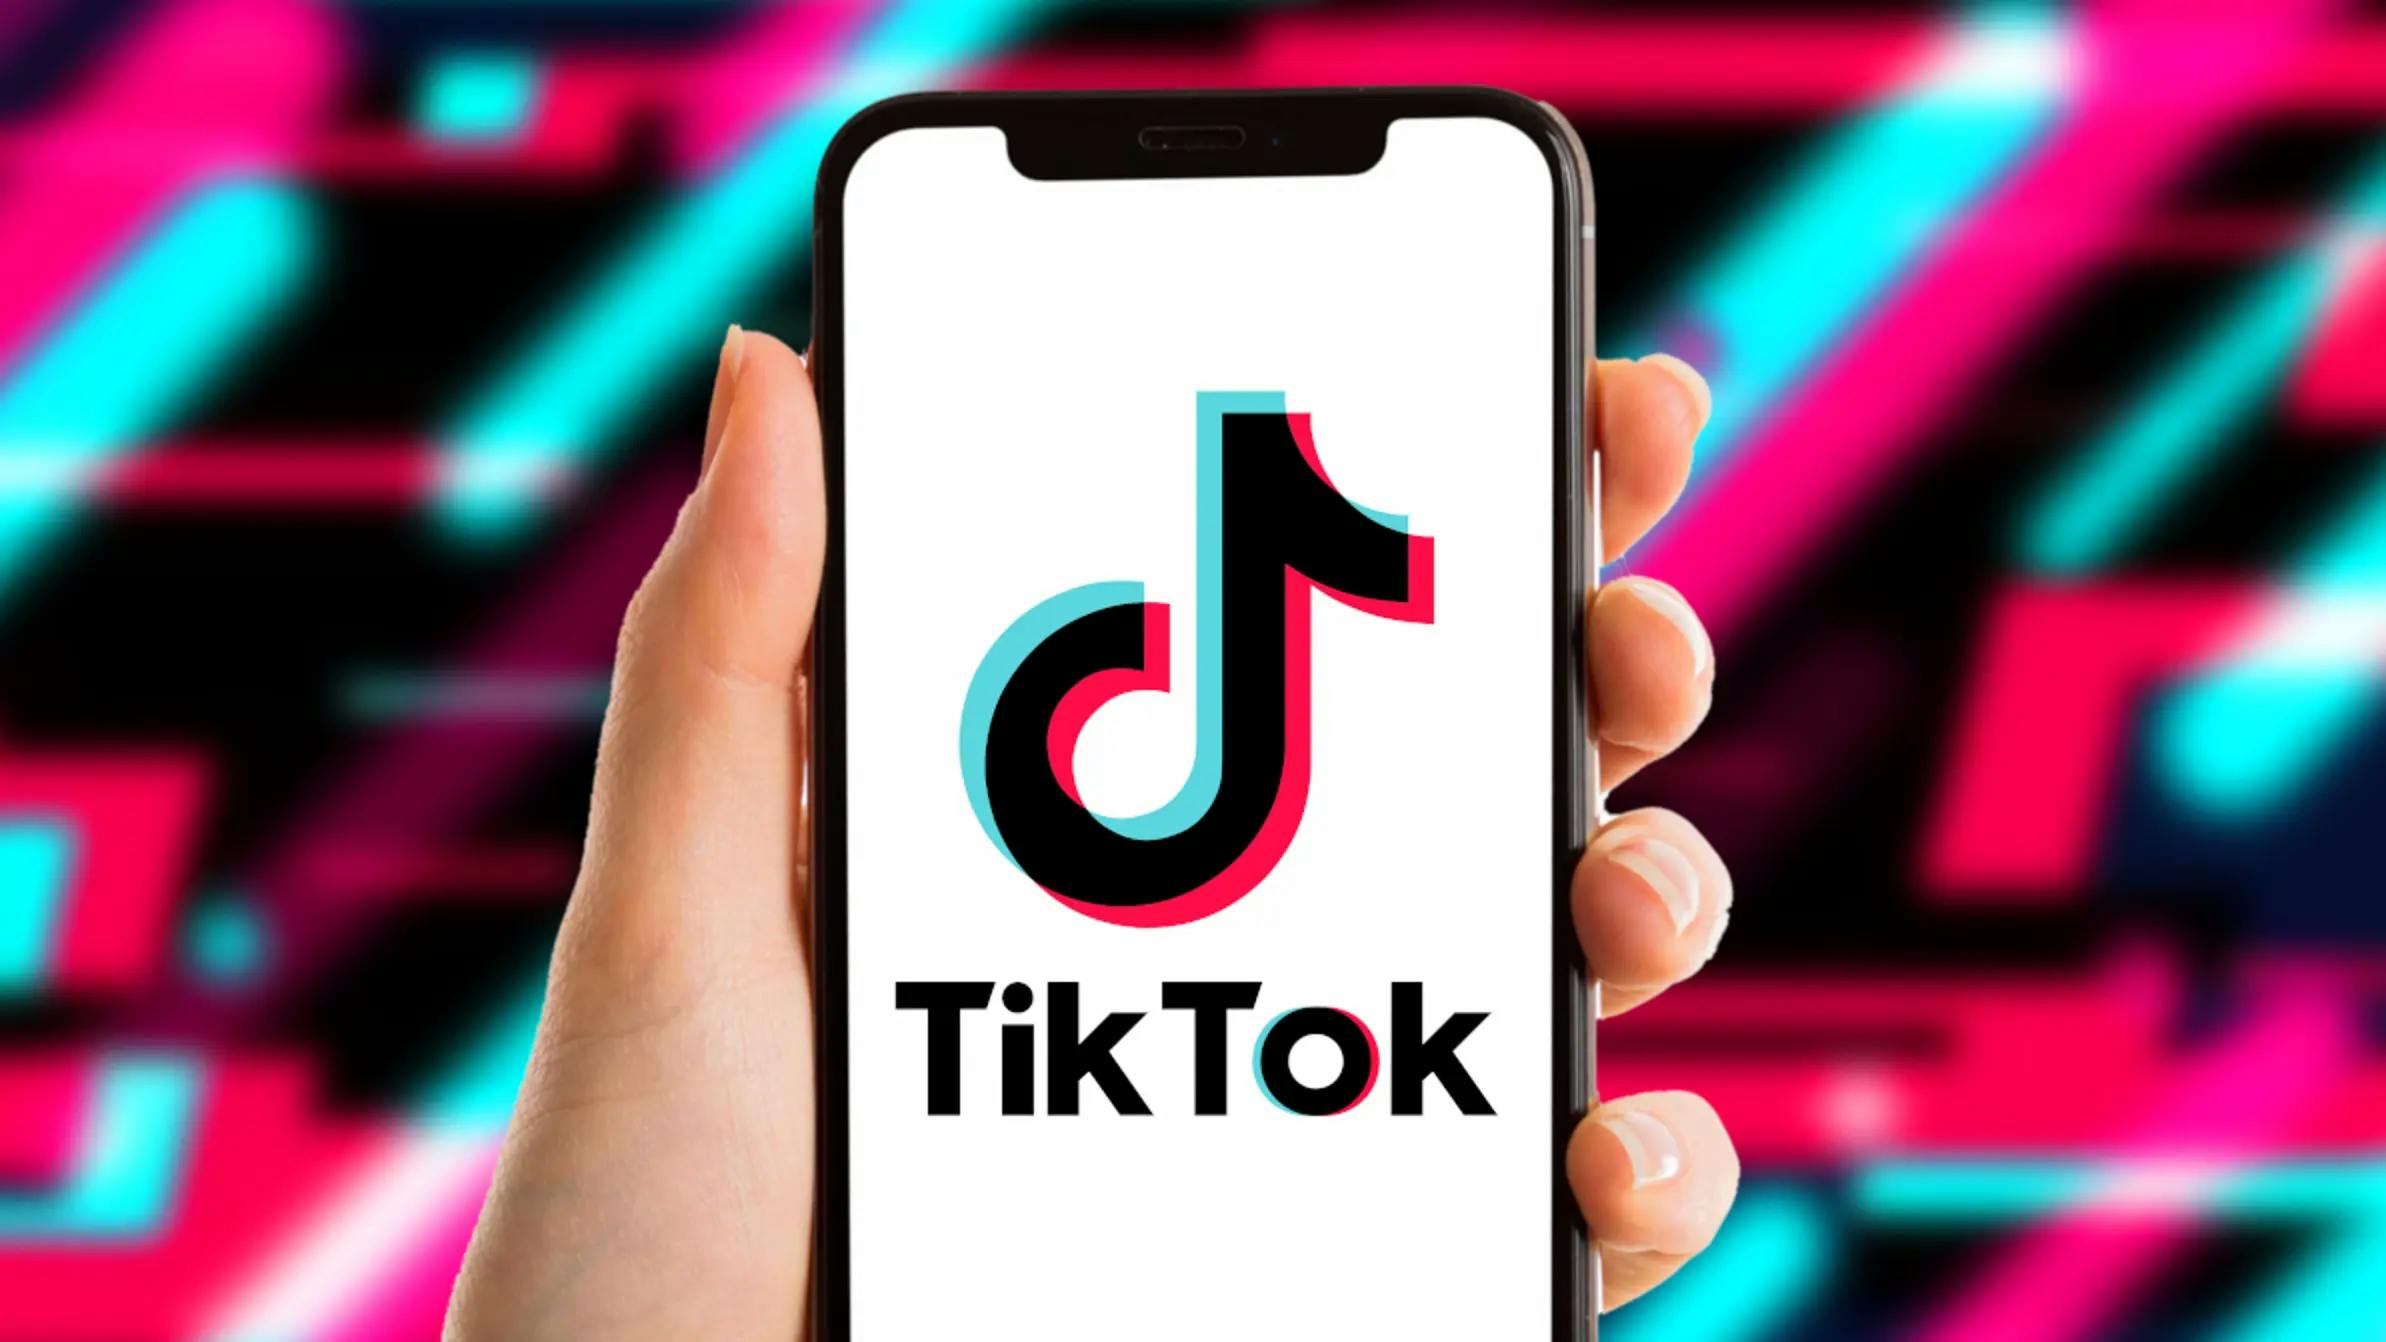 TikTok vs. Instagram Reels: Which One Is Better for Video Creation?